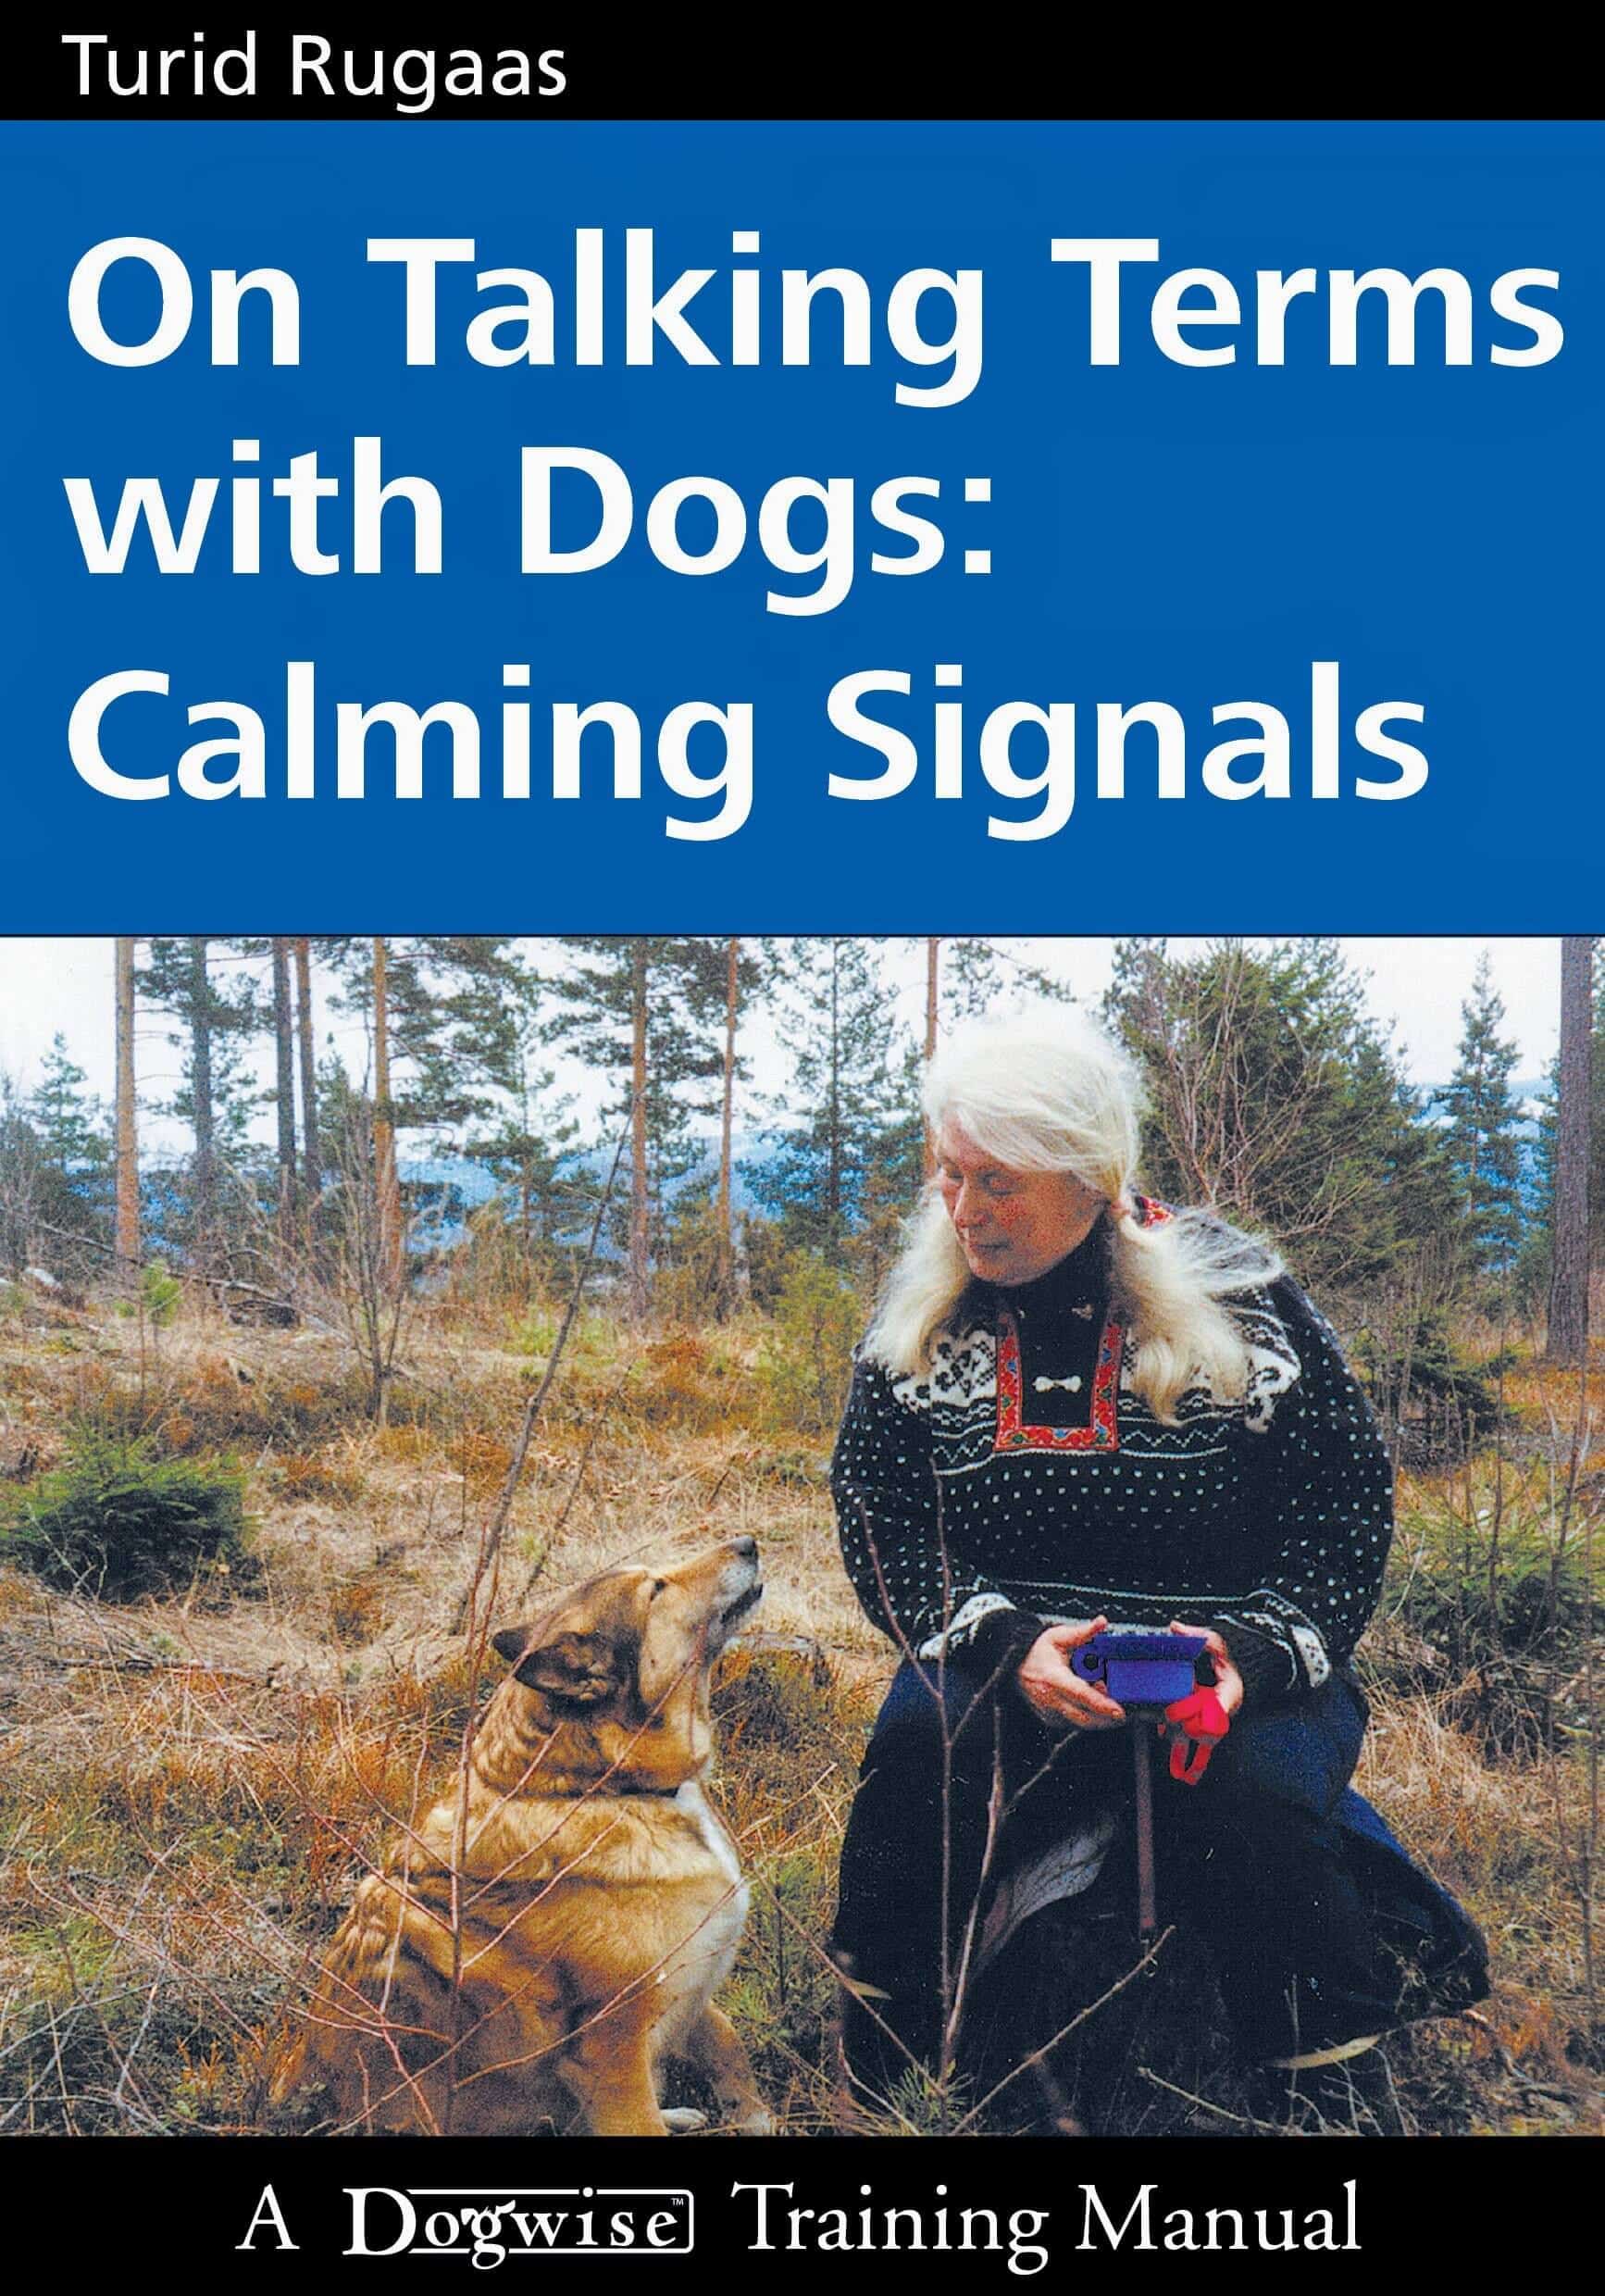 On Talking Terms With Dogs: Calming Signals By Turid Rugaas